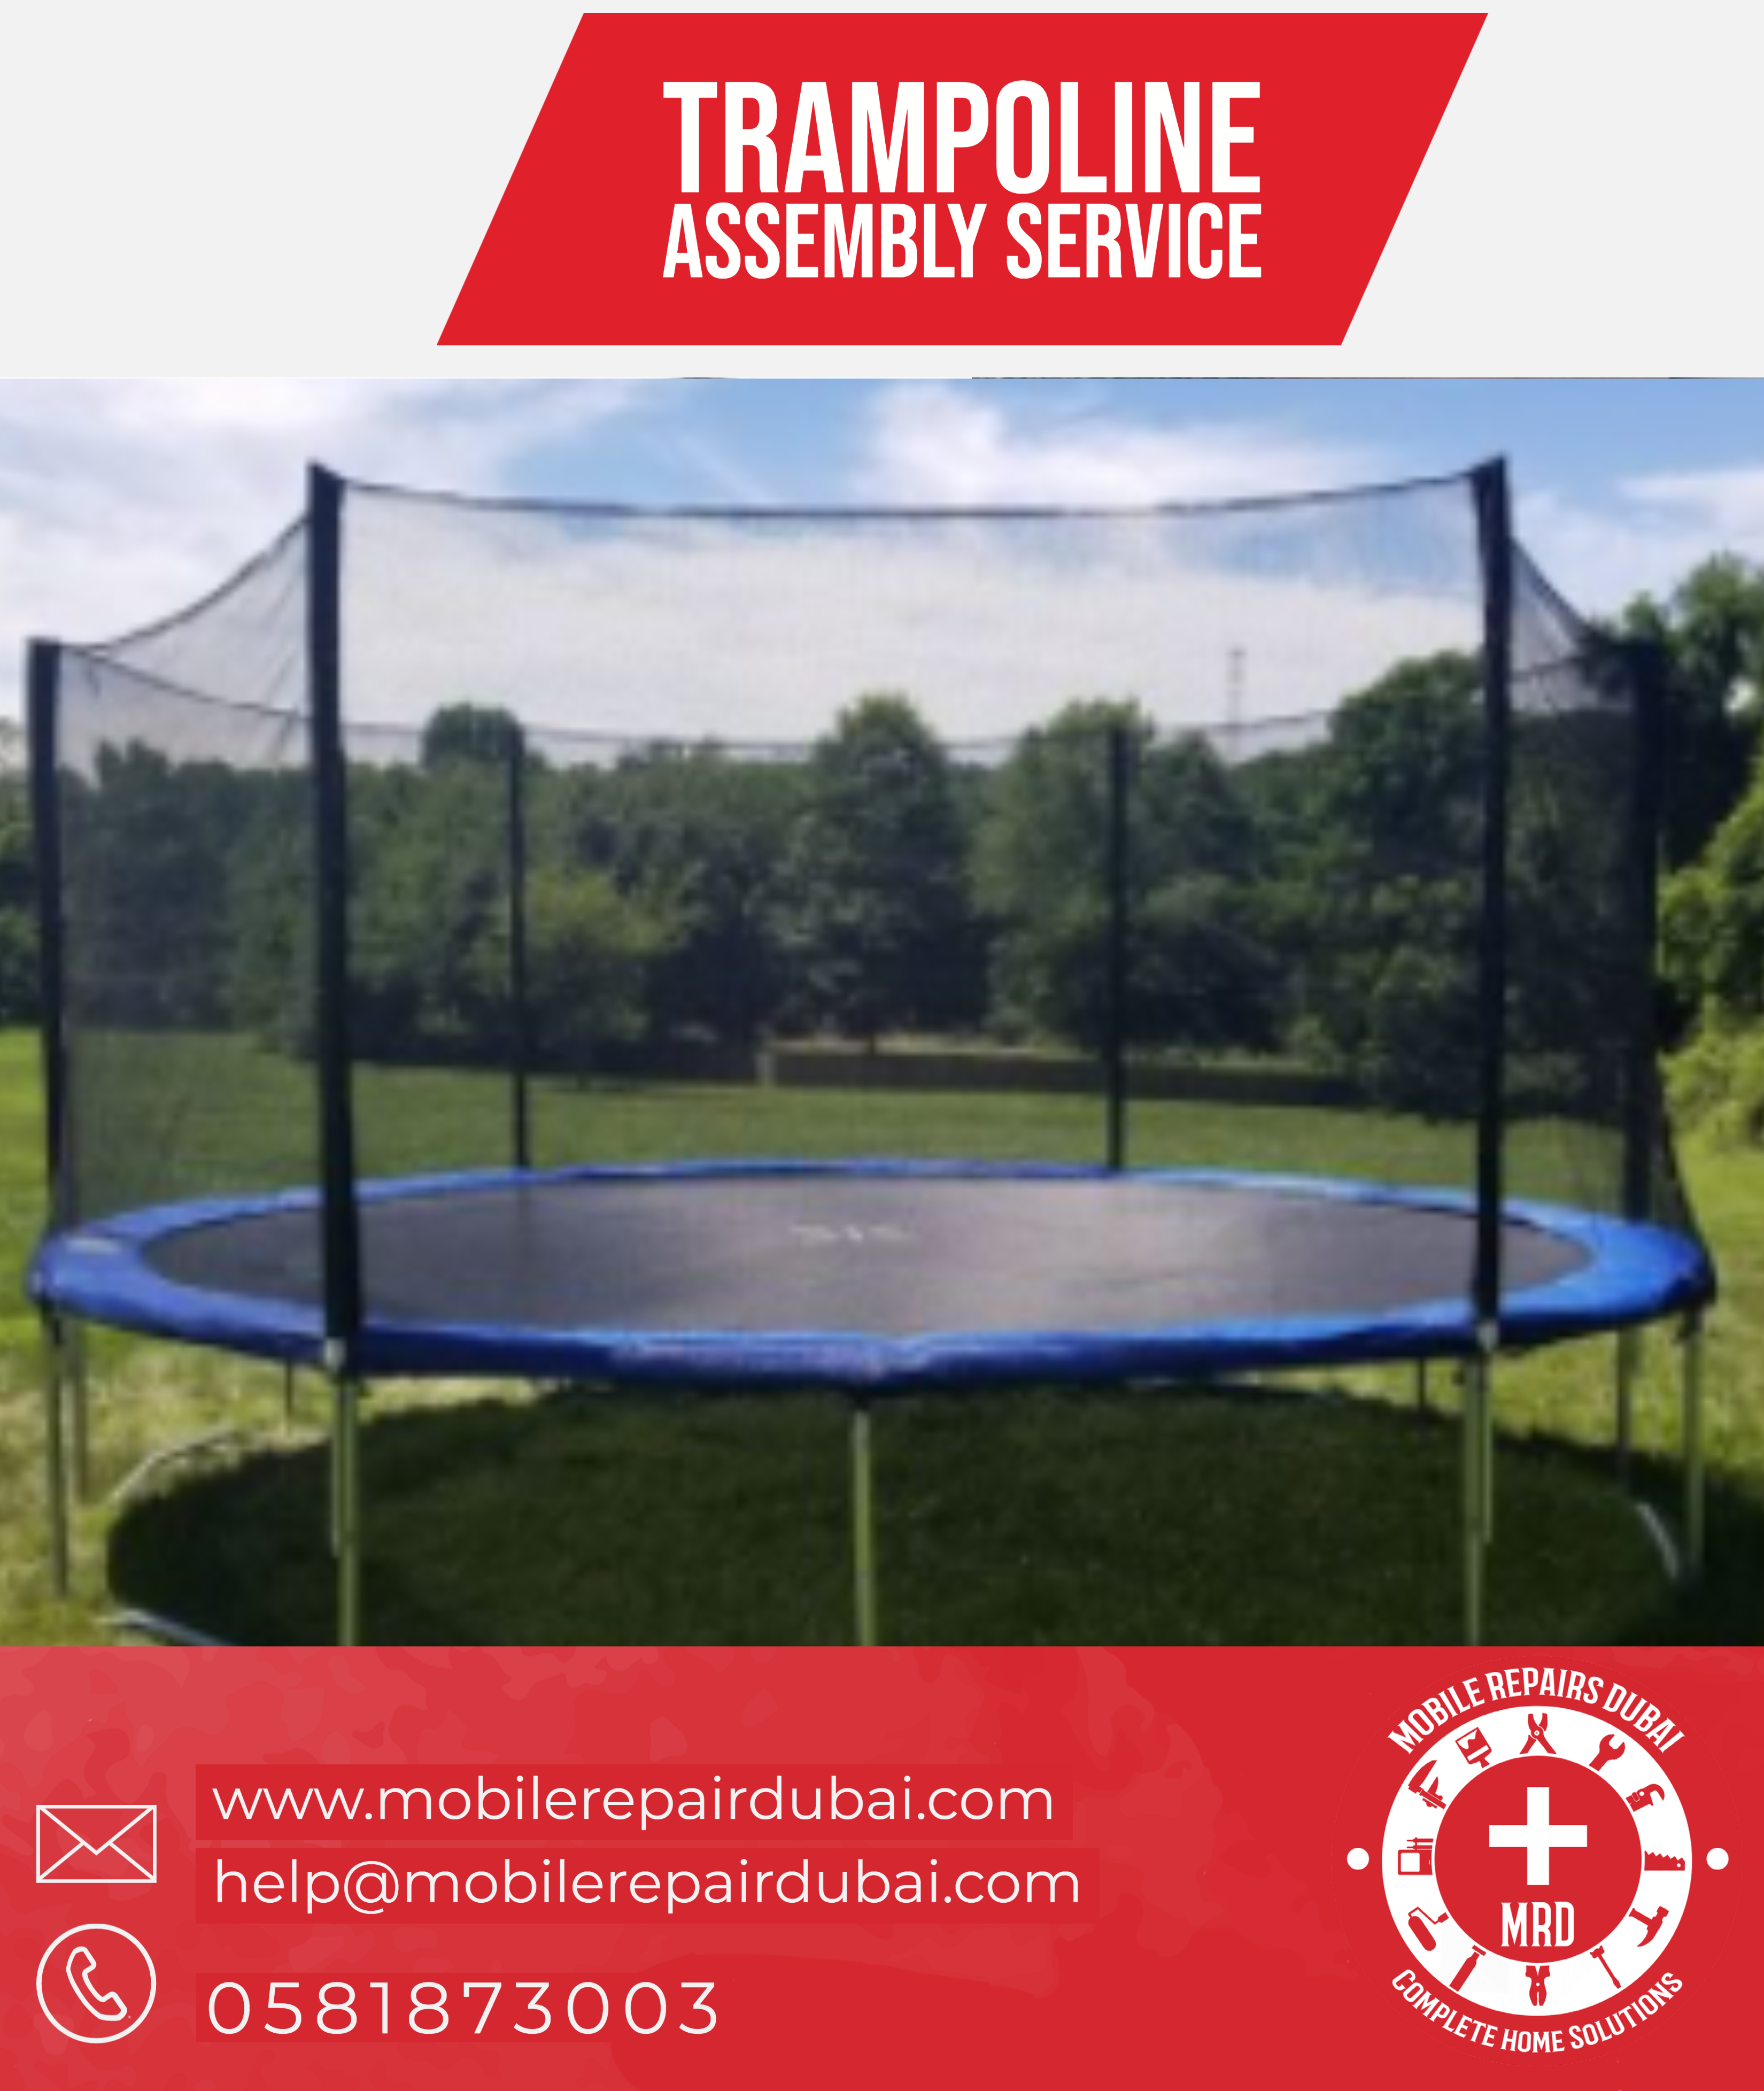 Trampoline assembly service 0524674030 - Mobile Repairs